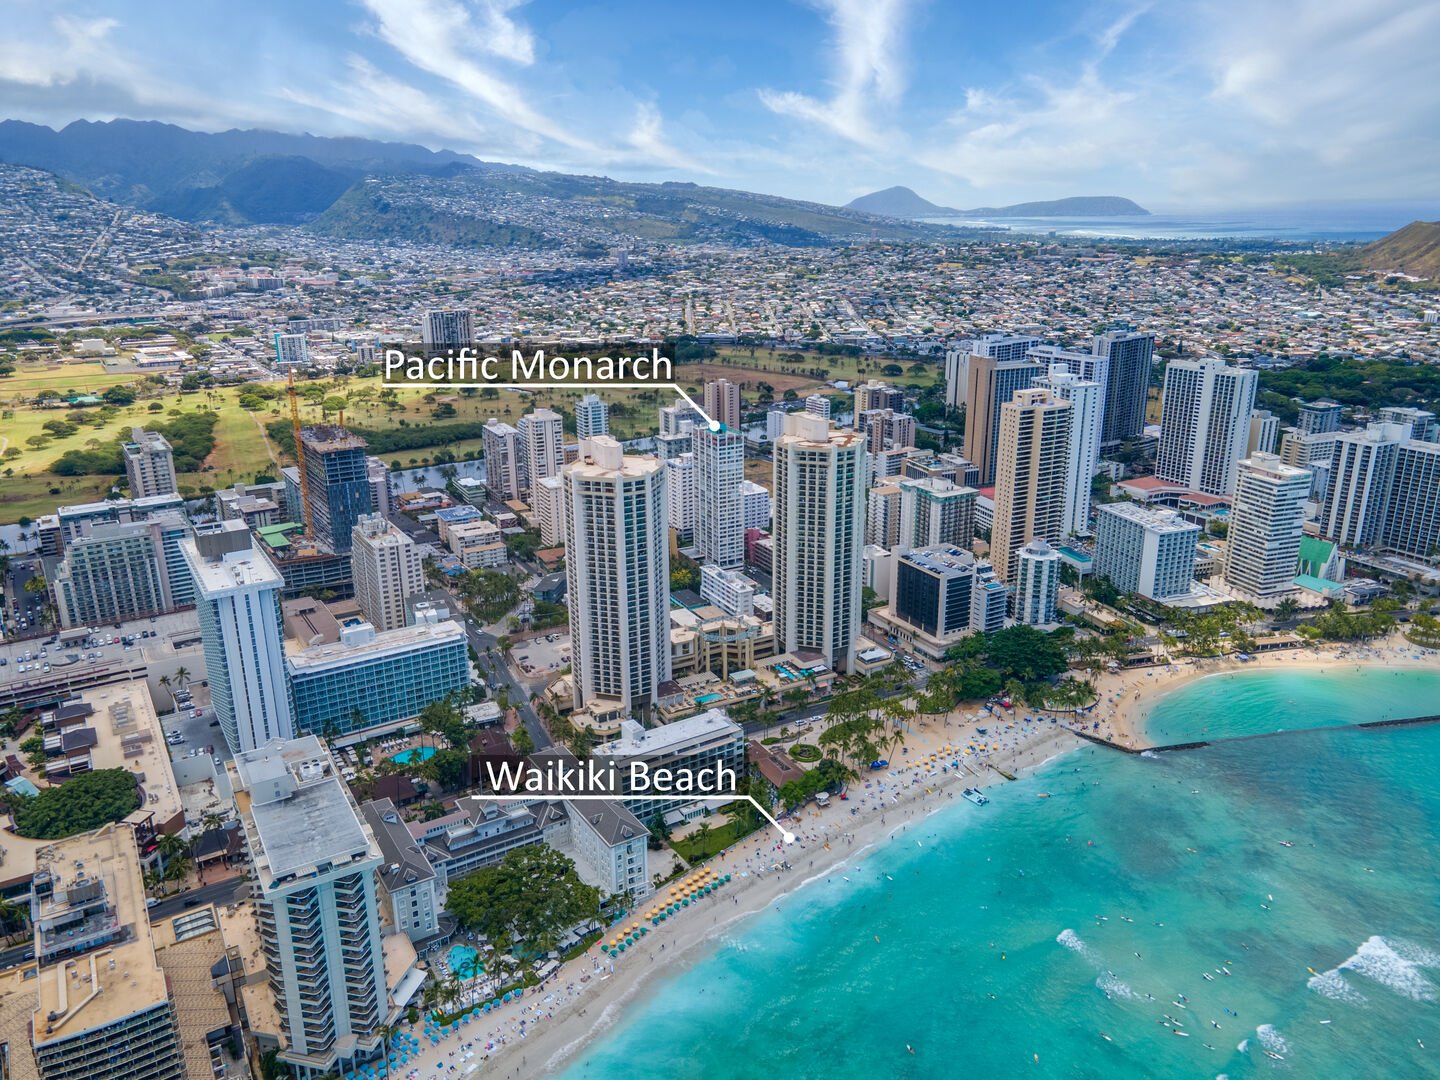 The Pacific Monarch is only 700 feet to the beach of Waikiki!